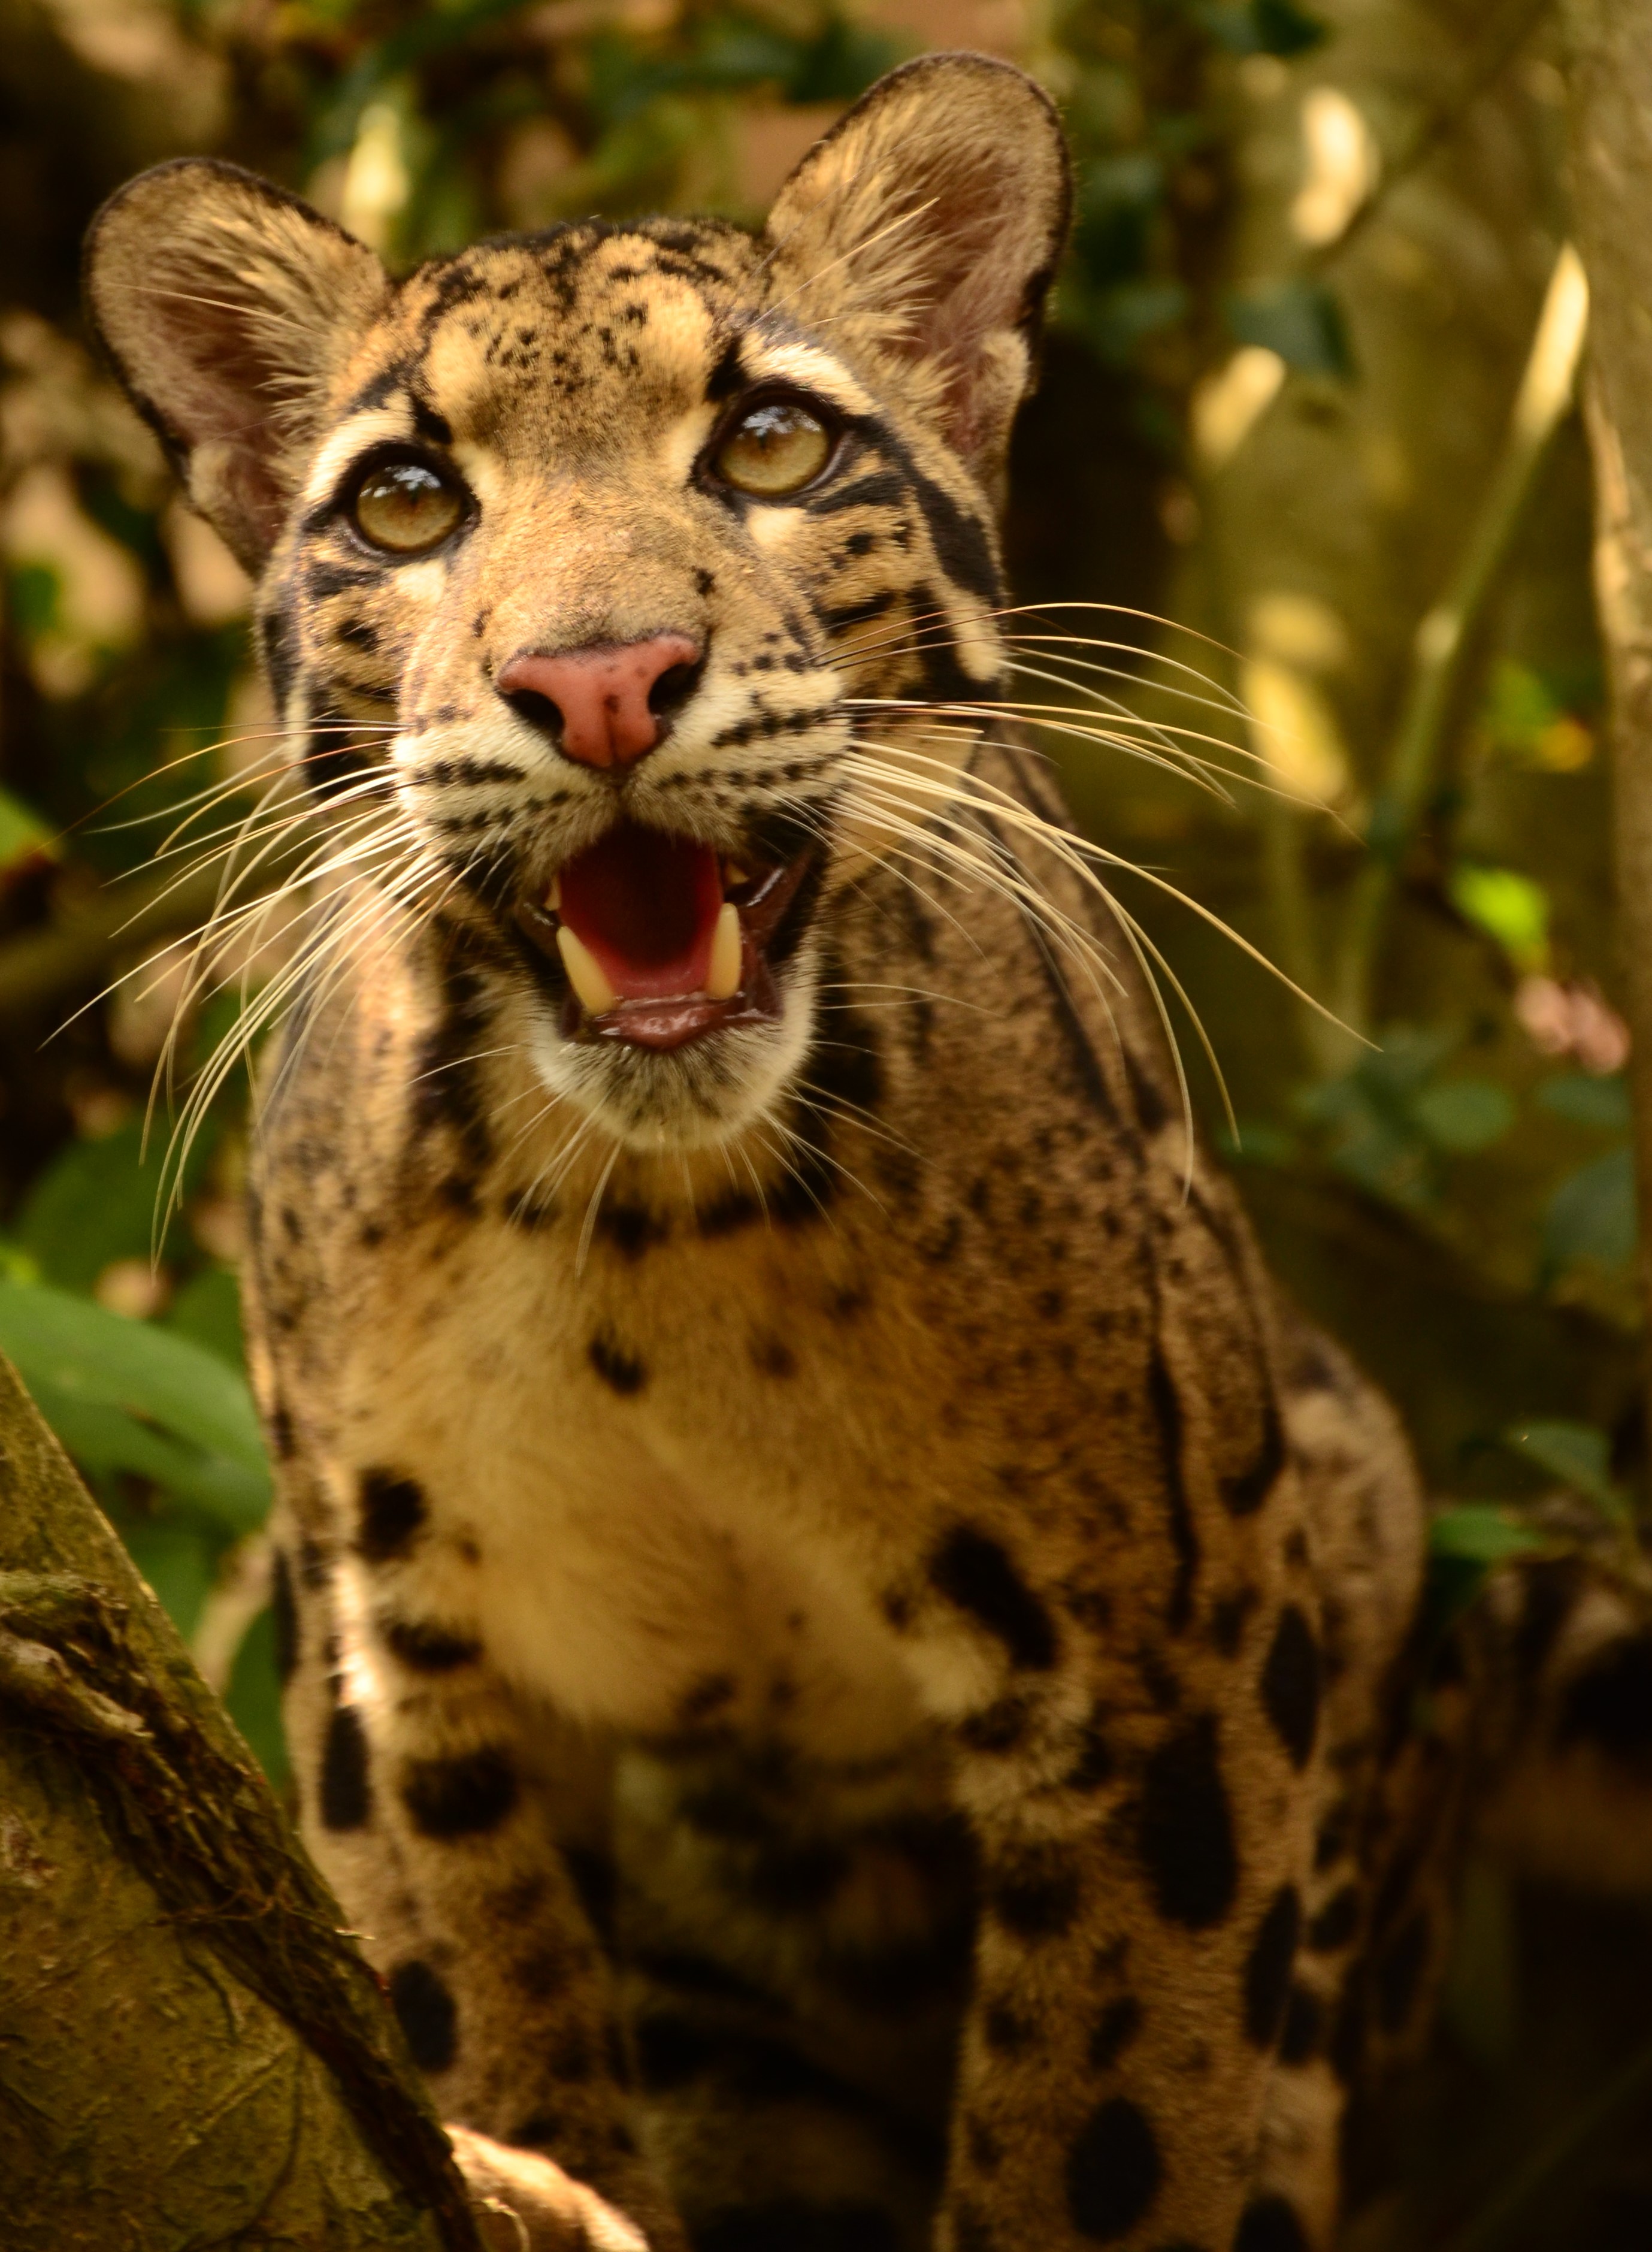 Learning More About the Little-understood Clouded Leopard by Maureen O. Duryee